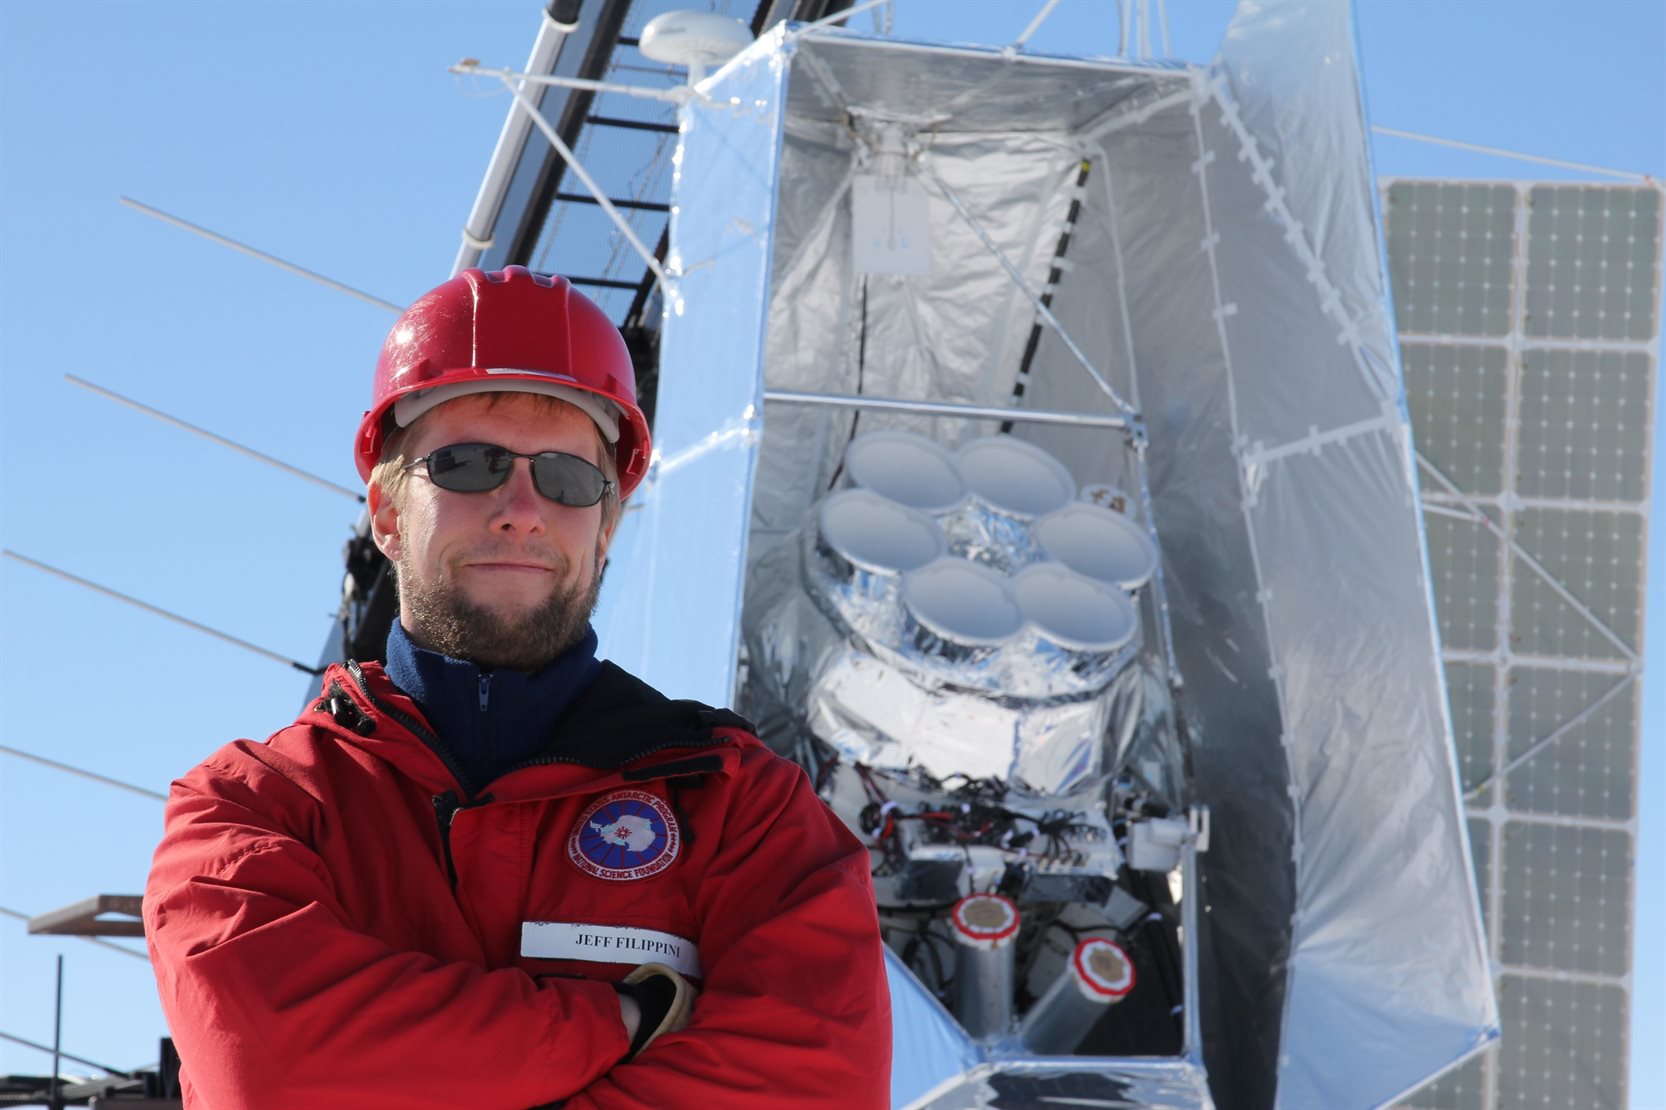 <sub>Illinois Physics Professor Jeff Filippini stands in front of SPIDER, a balloon-borne cosmic microwave background (CMB) telescope, on the launch pad at McMurdo Station, Antarctica. SPIDER is a cryogenic payload filled with over 1,000 liters of liquid helium. Credit: SPIDER Collaboration</sub>